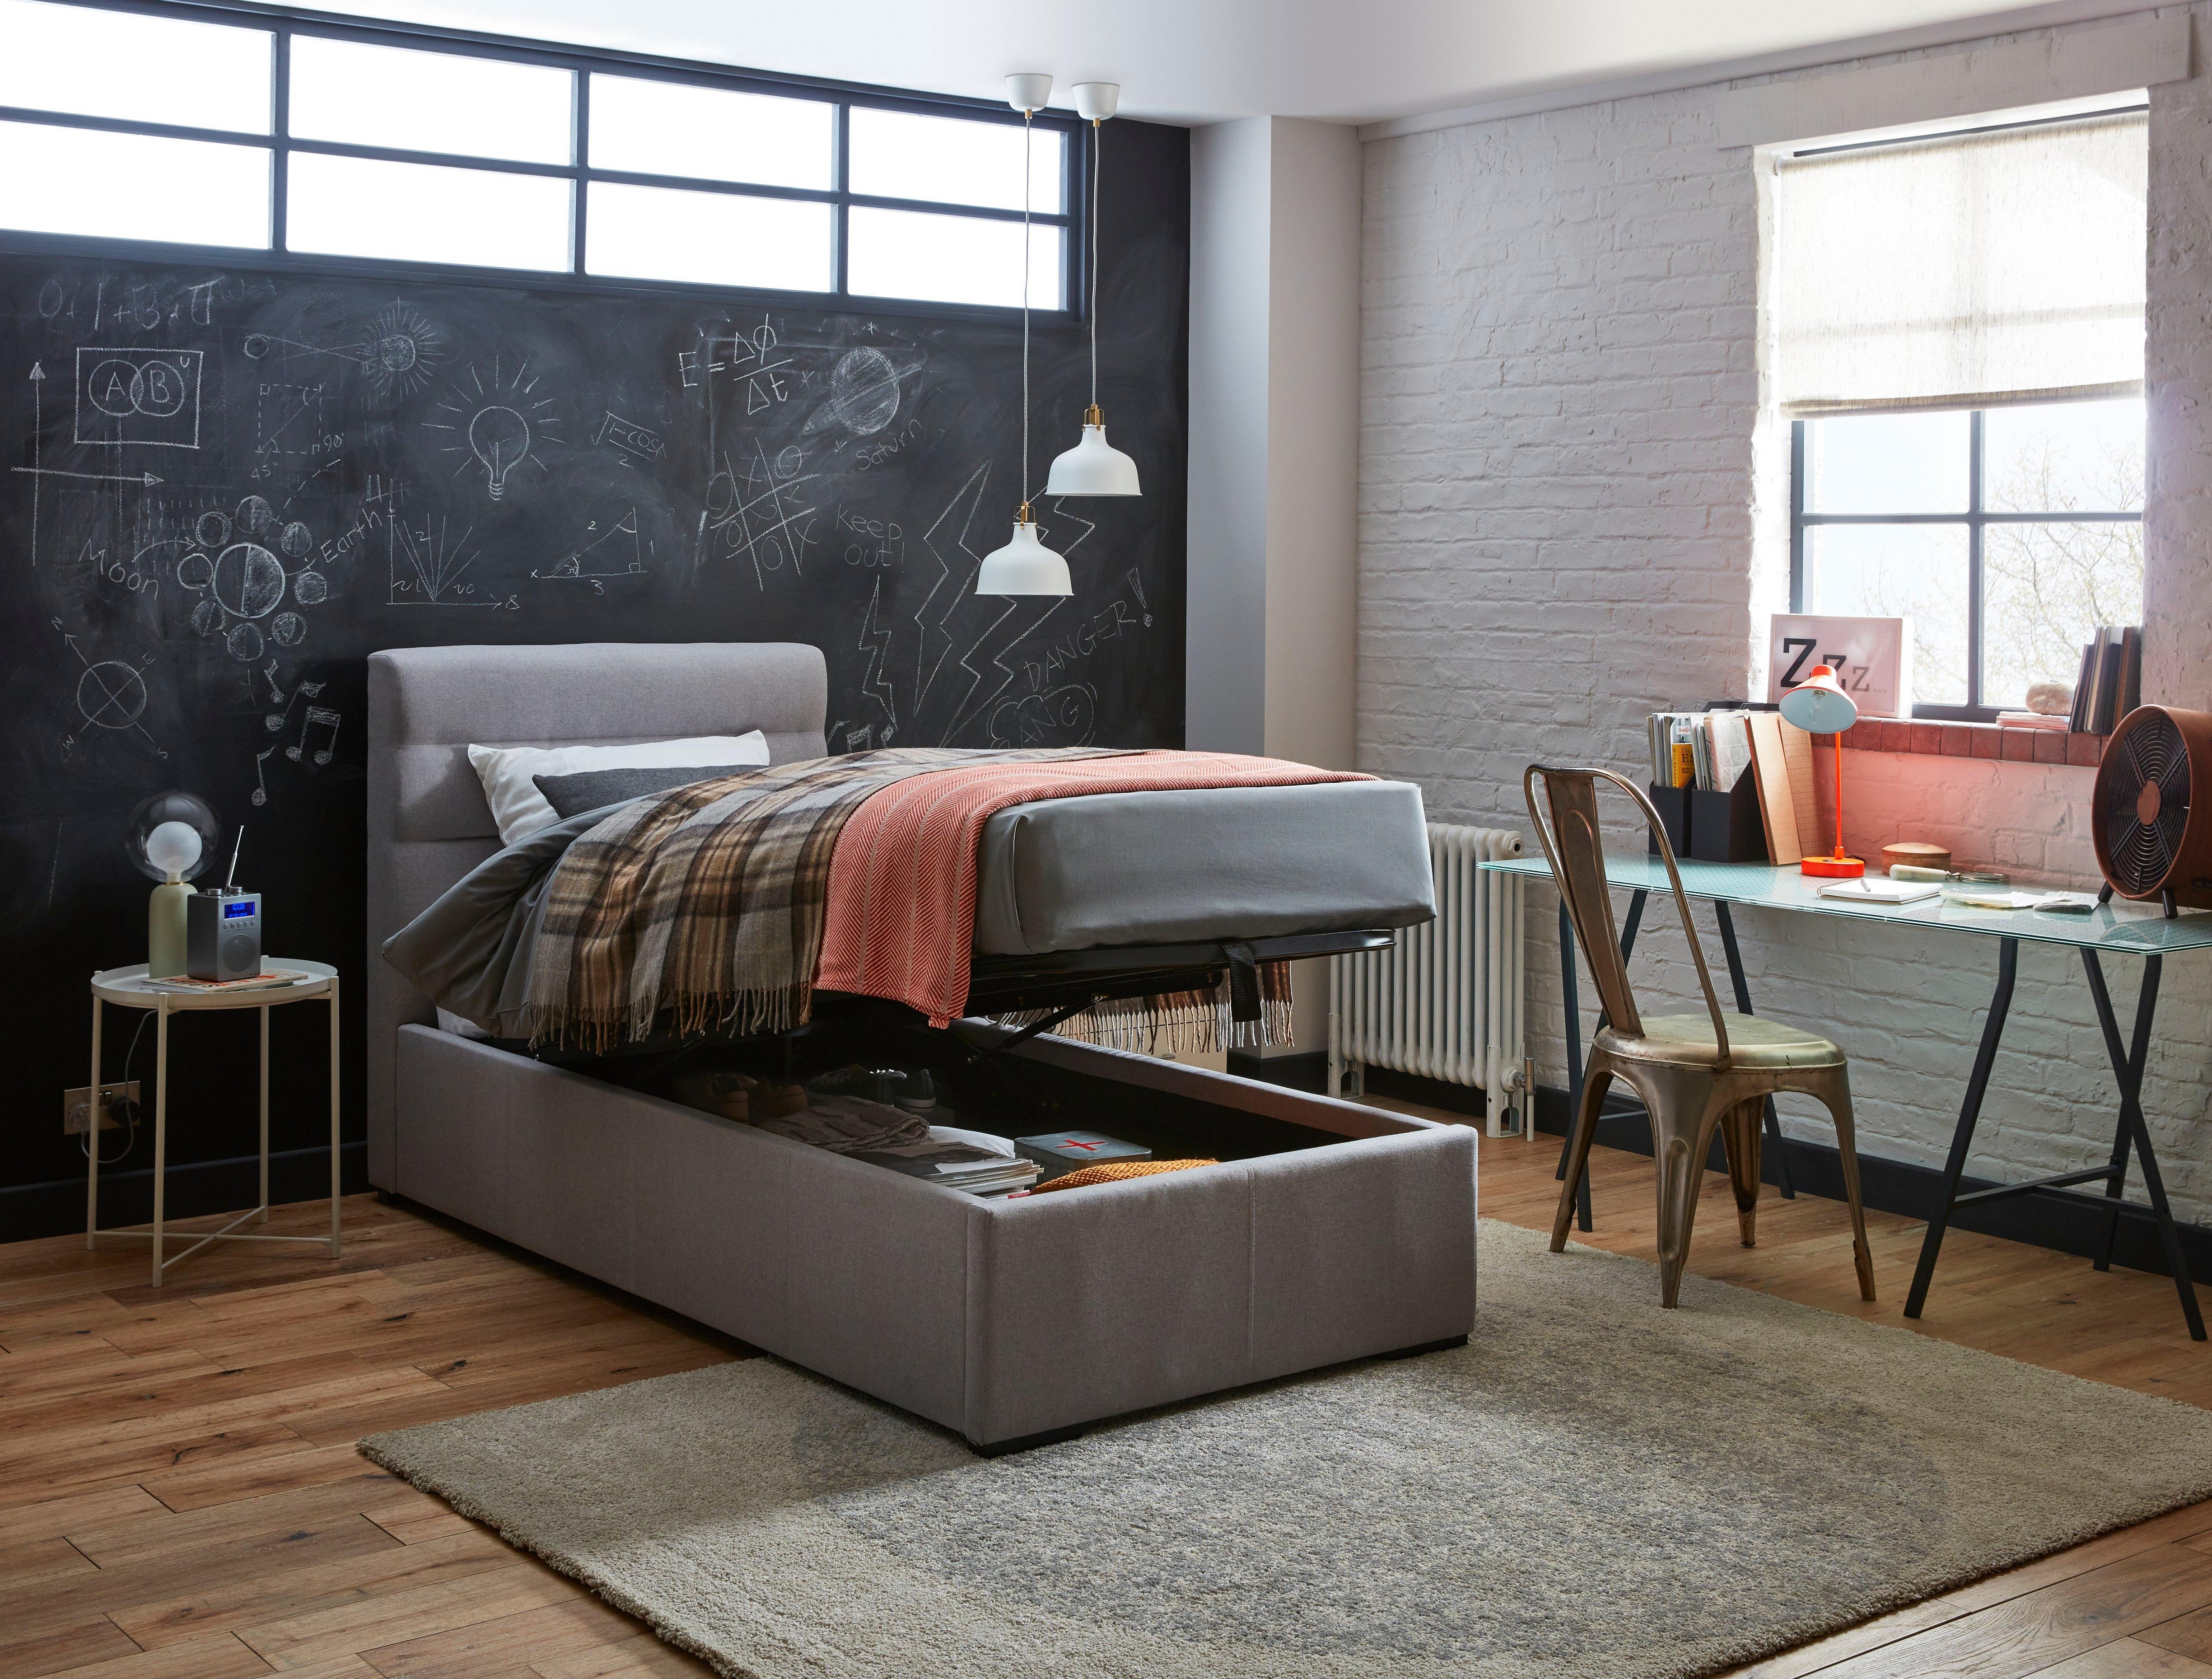 Bedroom designs for a modern teenage hideout